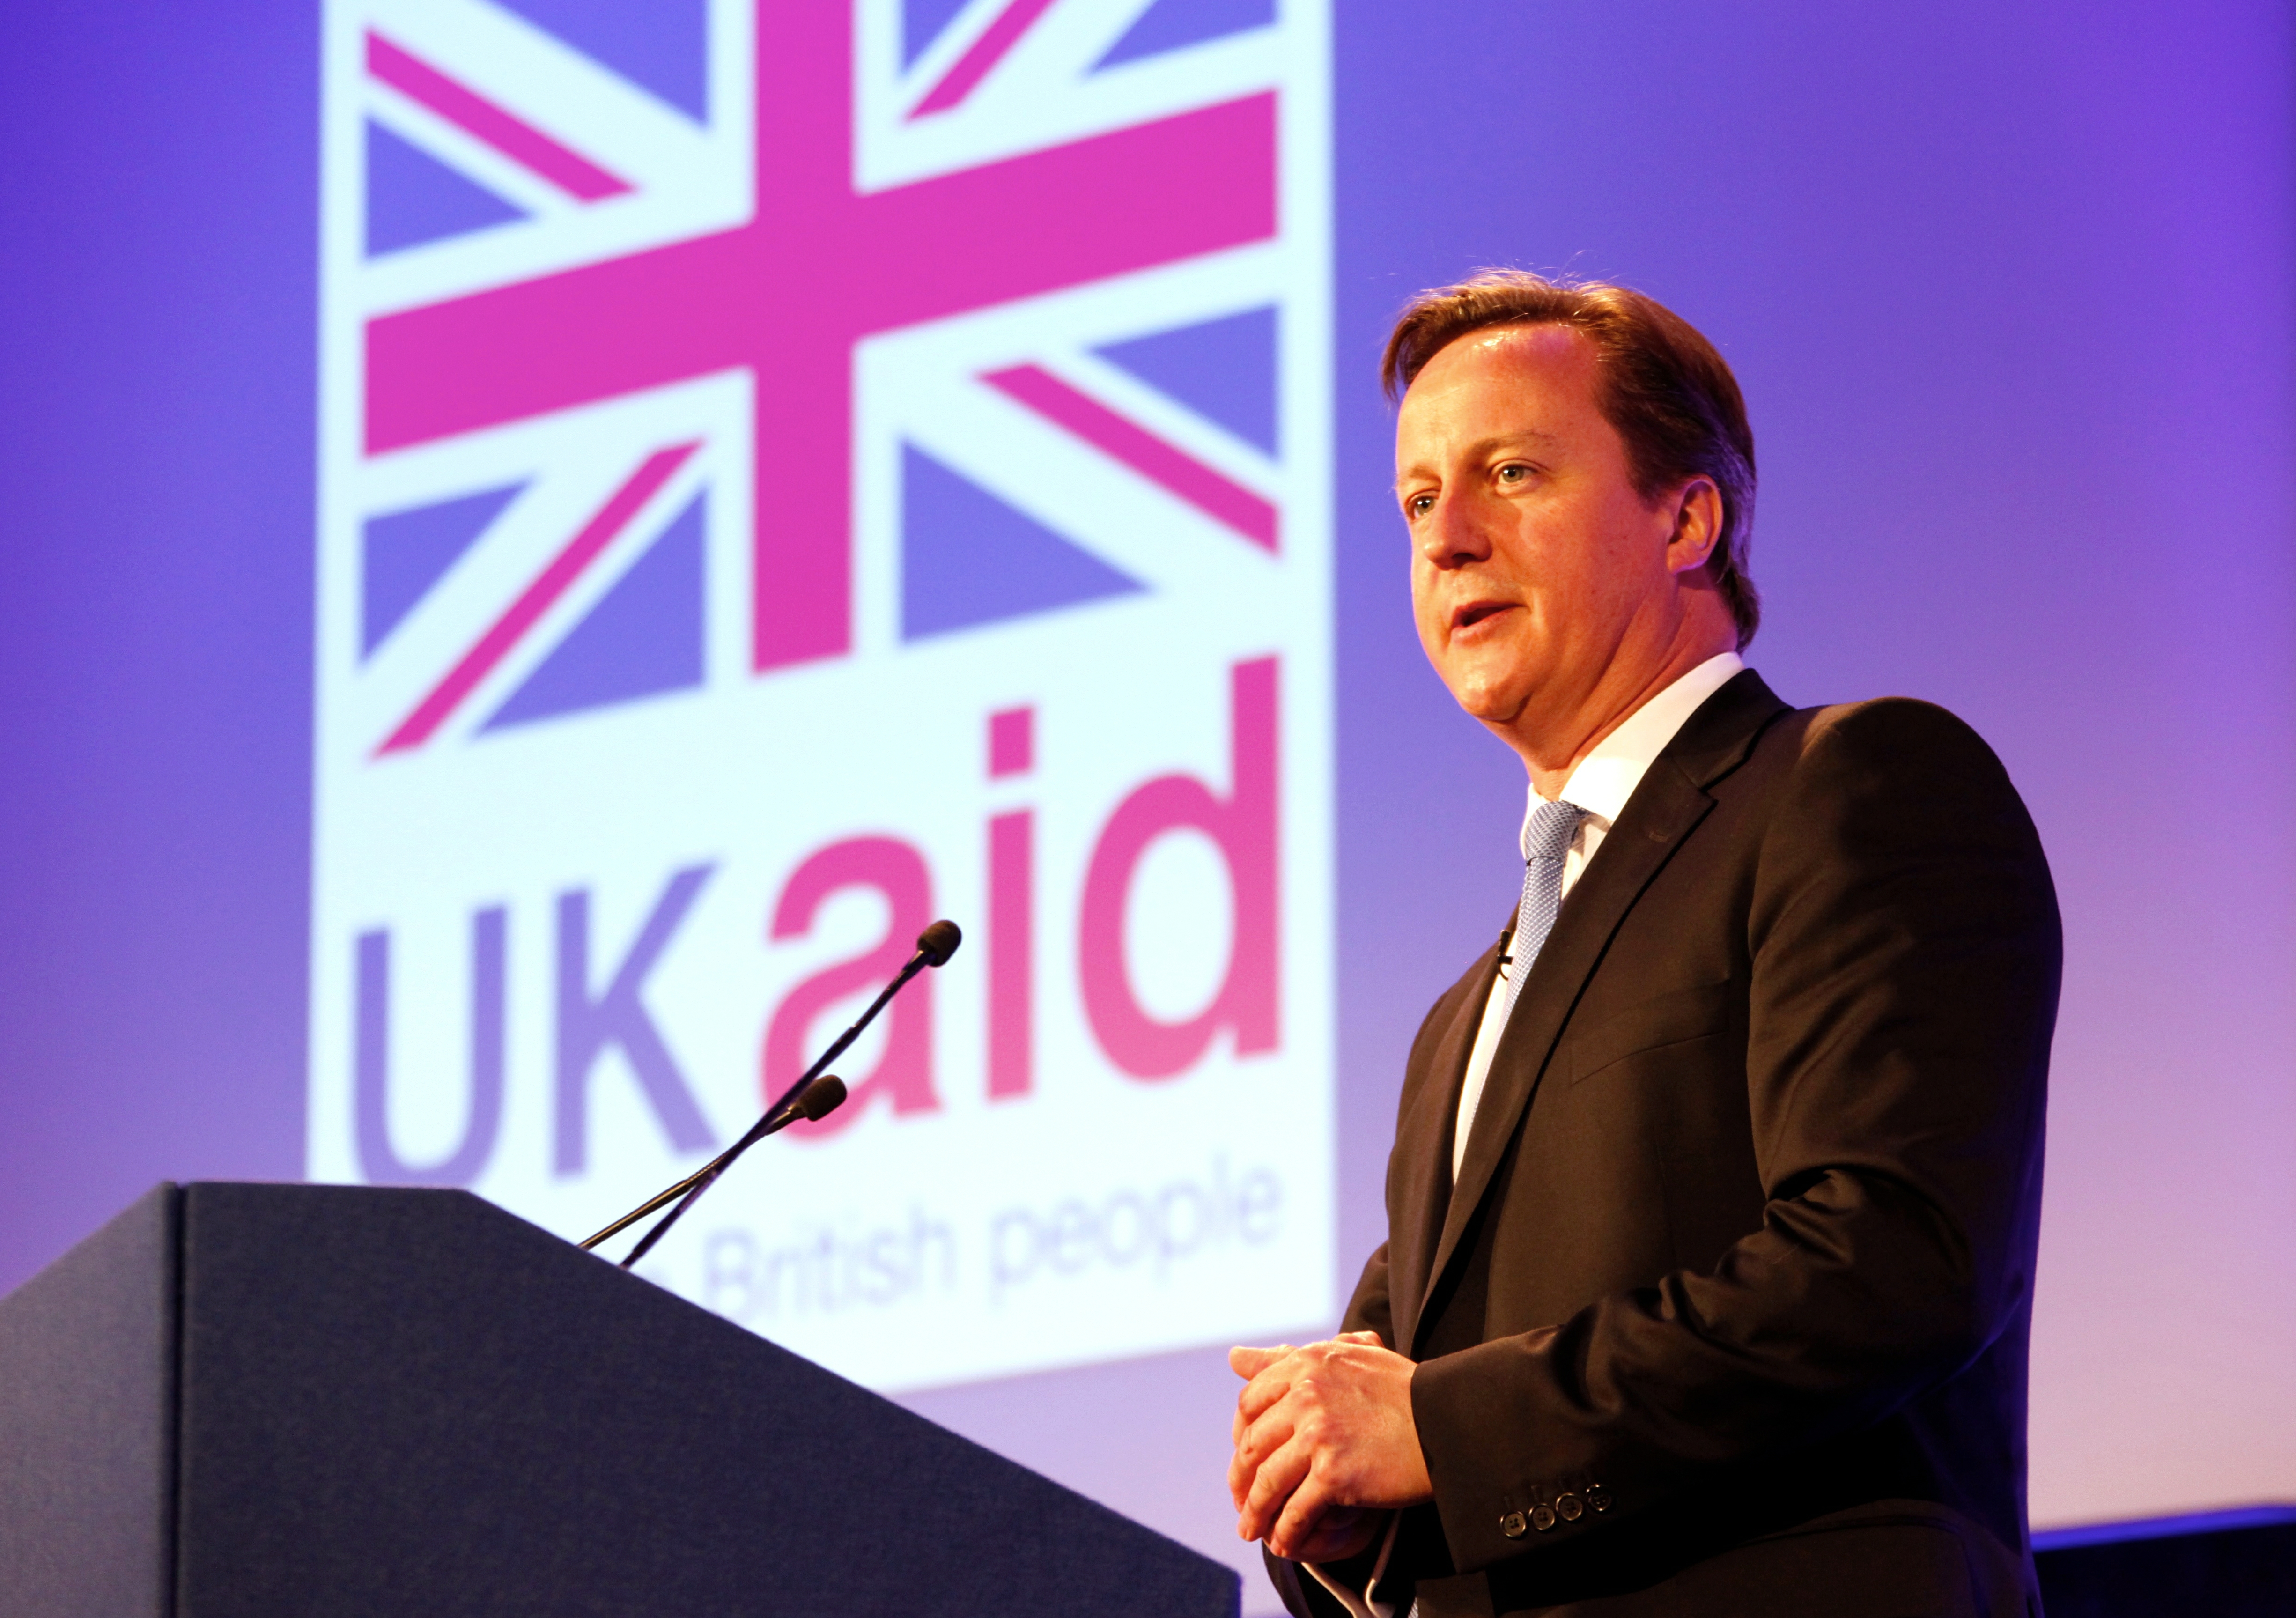 What a UK Conservative government means for International Development